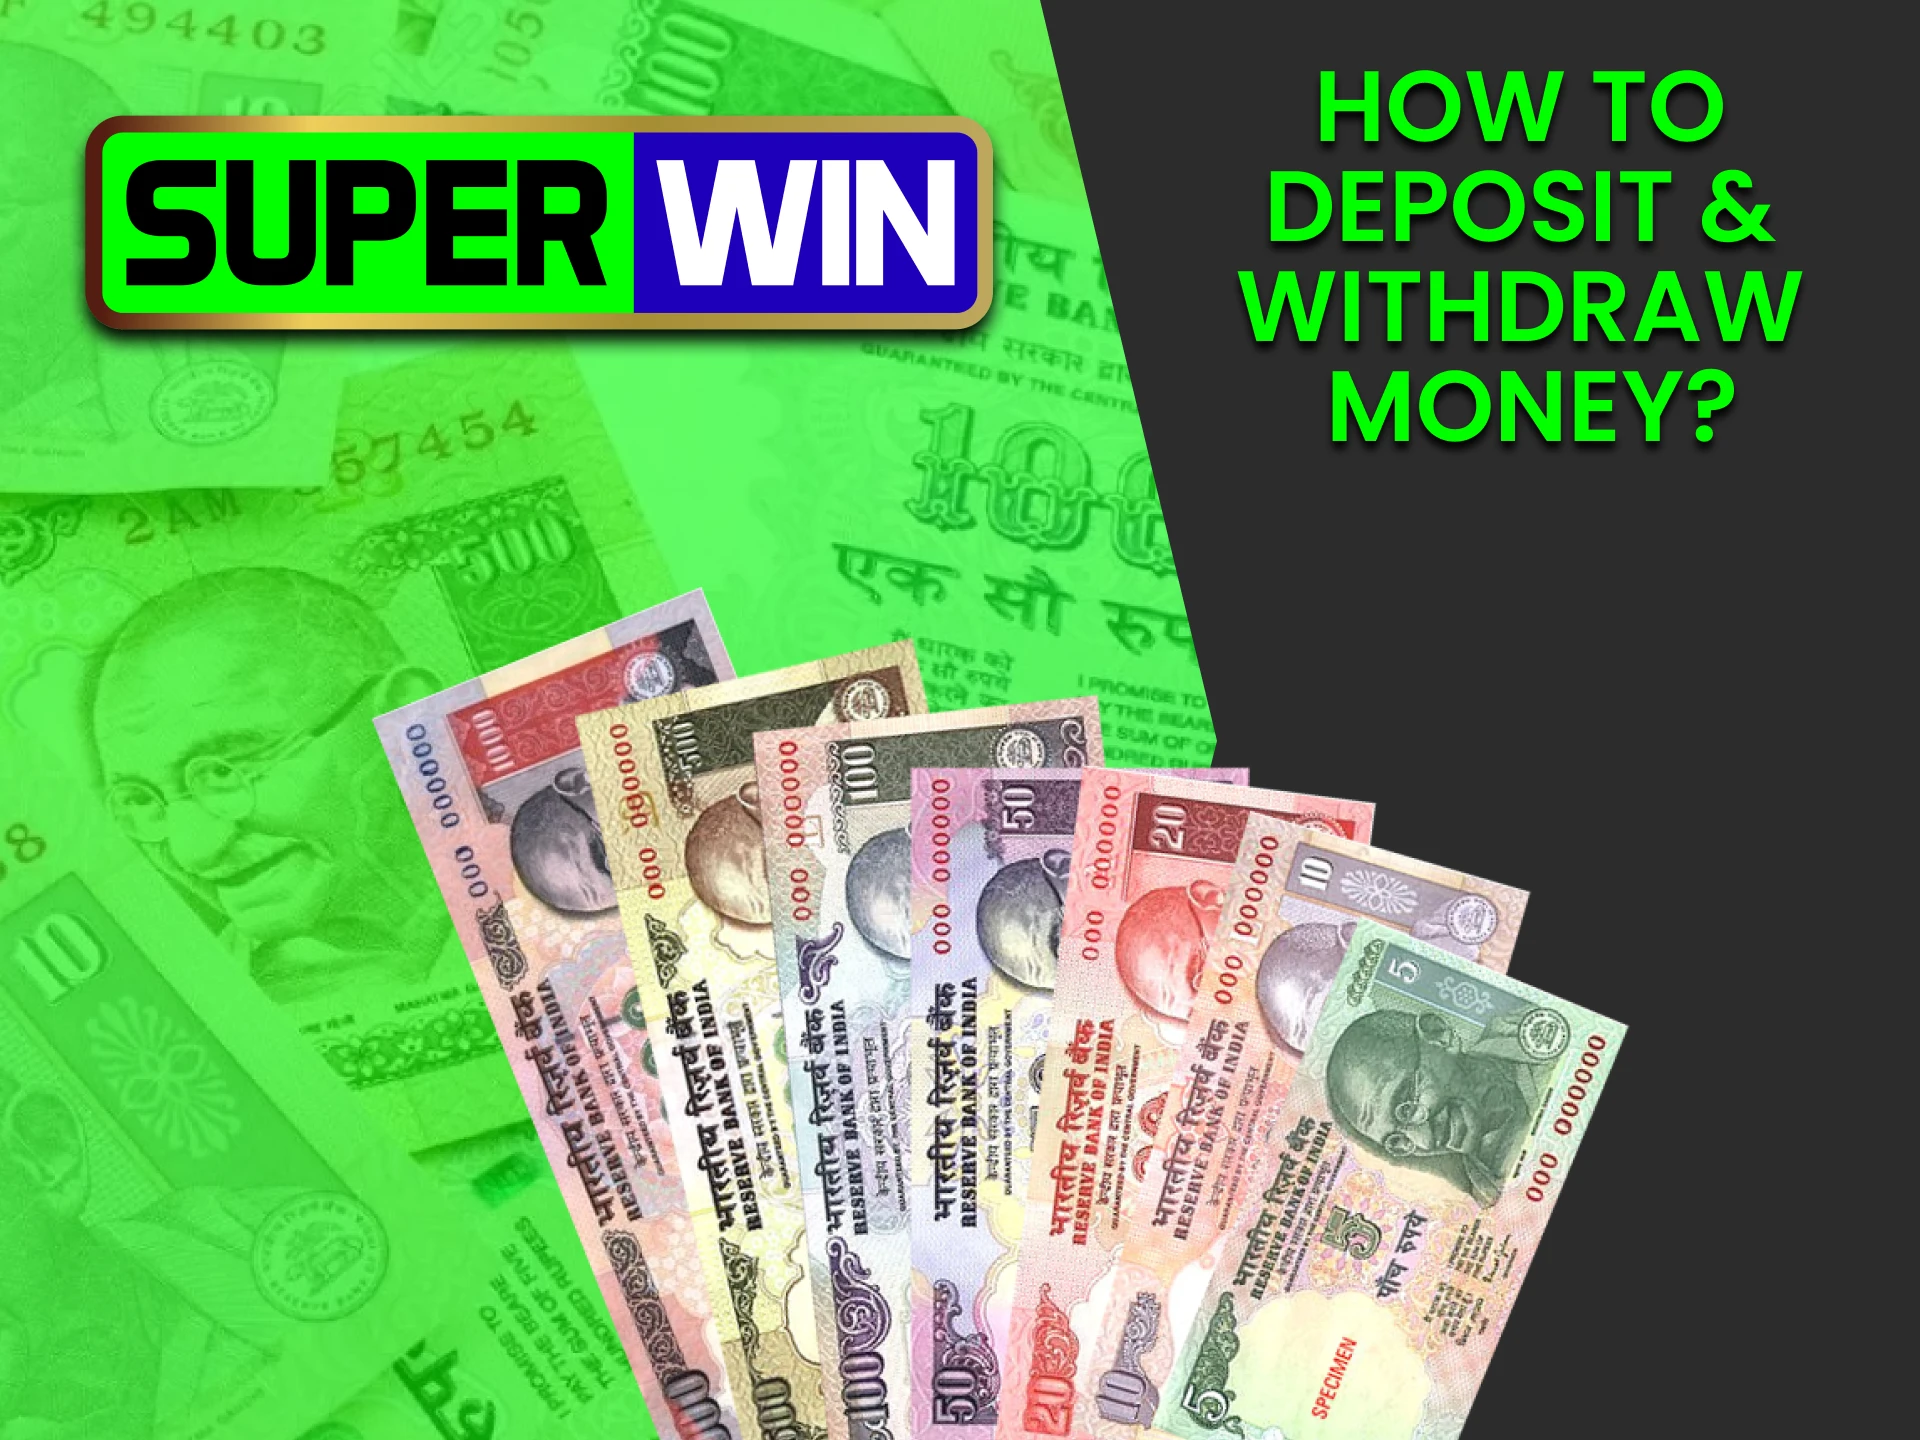 We will tell you how to top up or withdraw funds from Superwin.